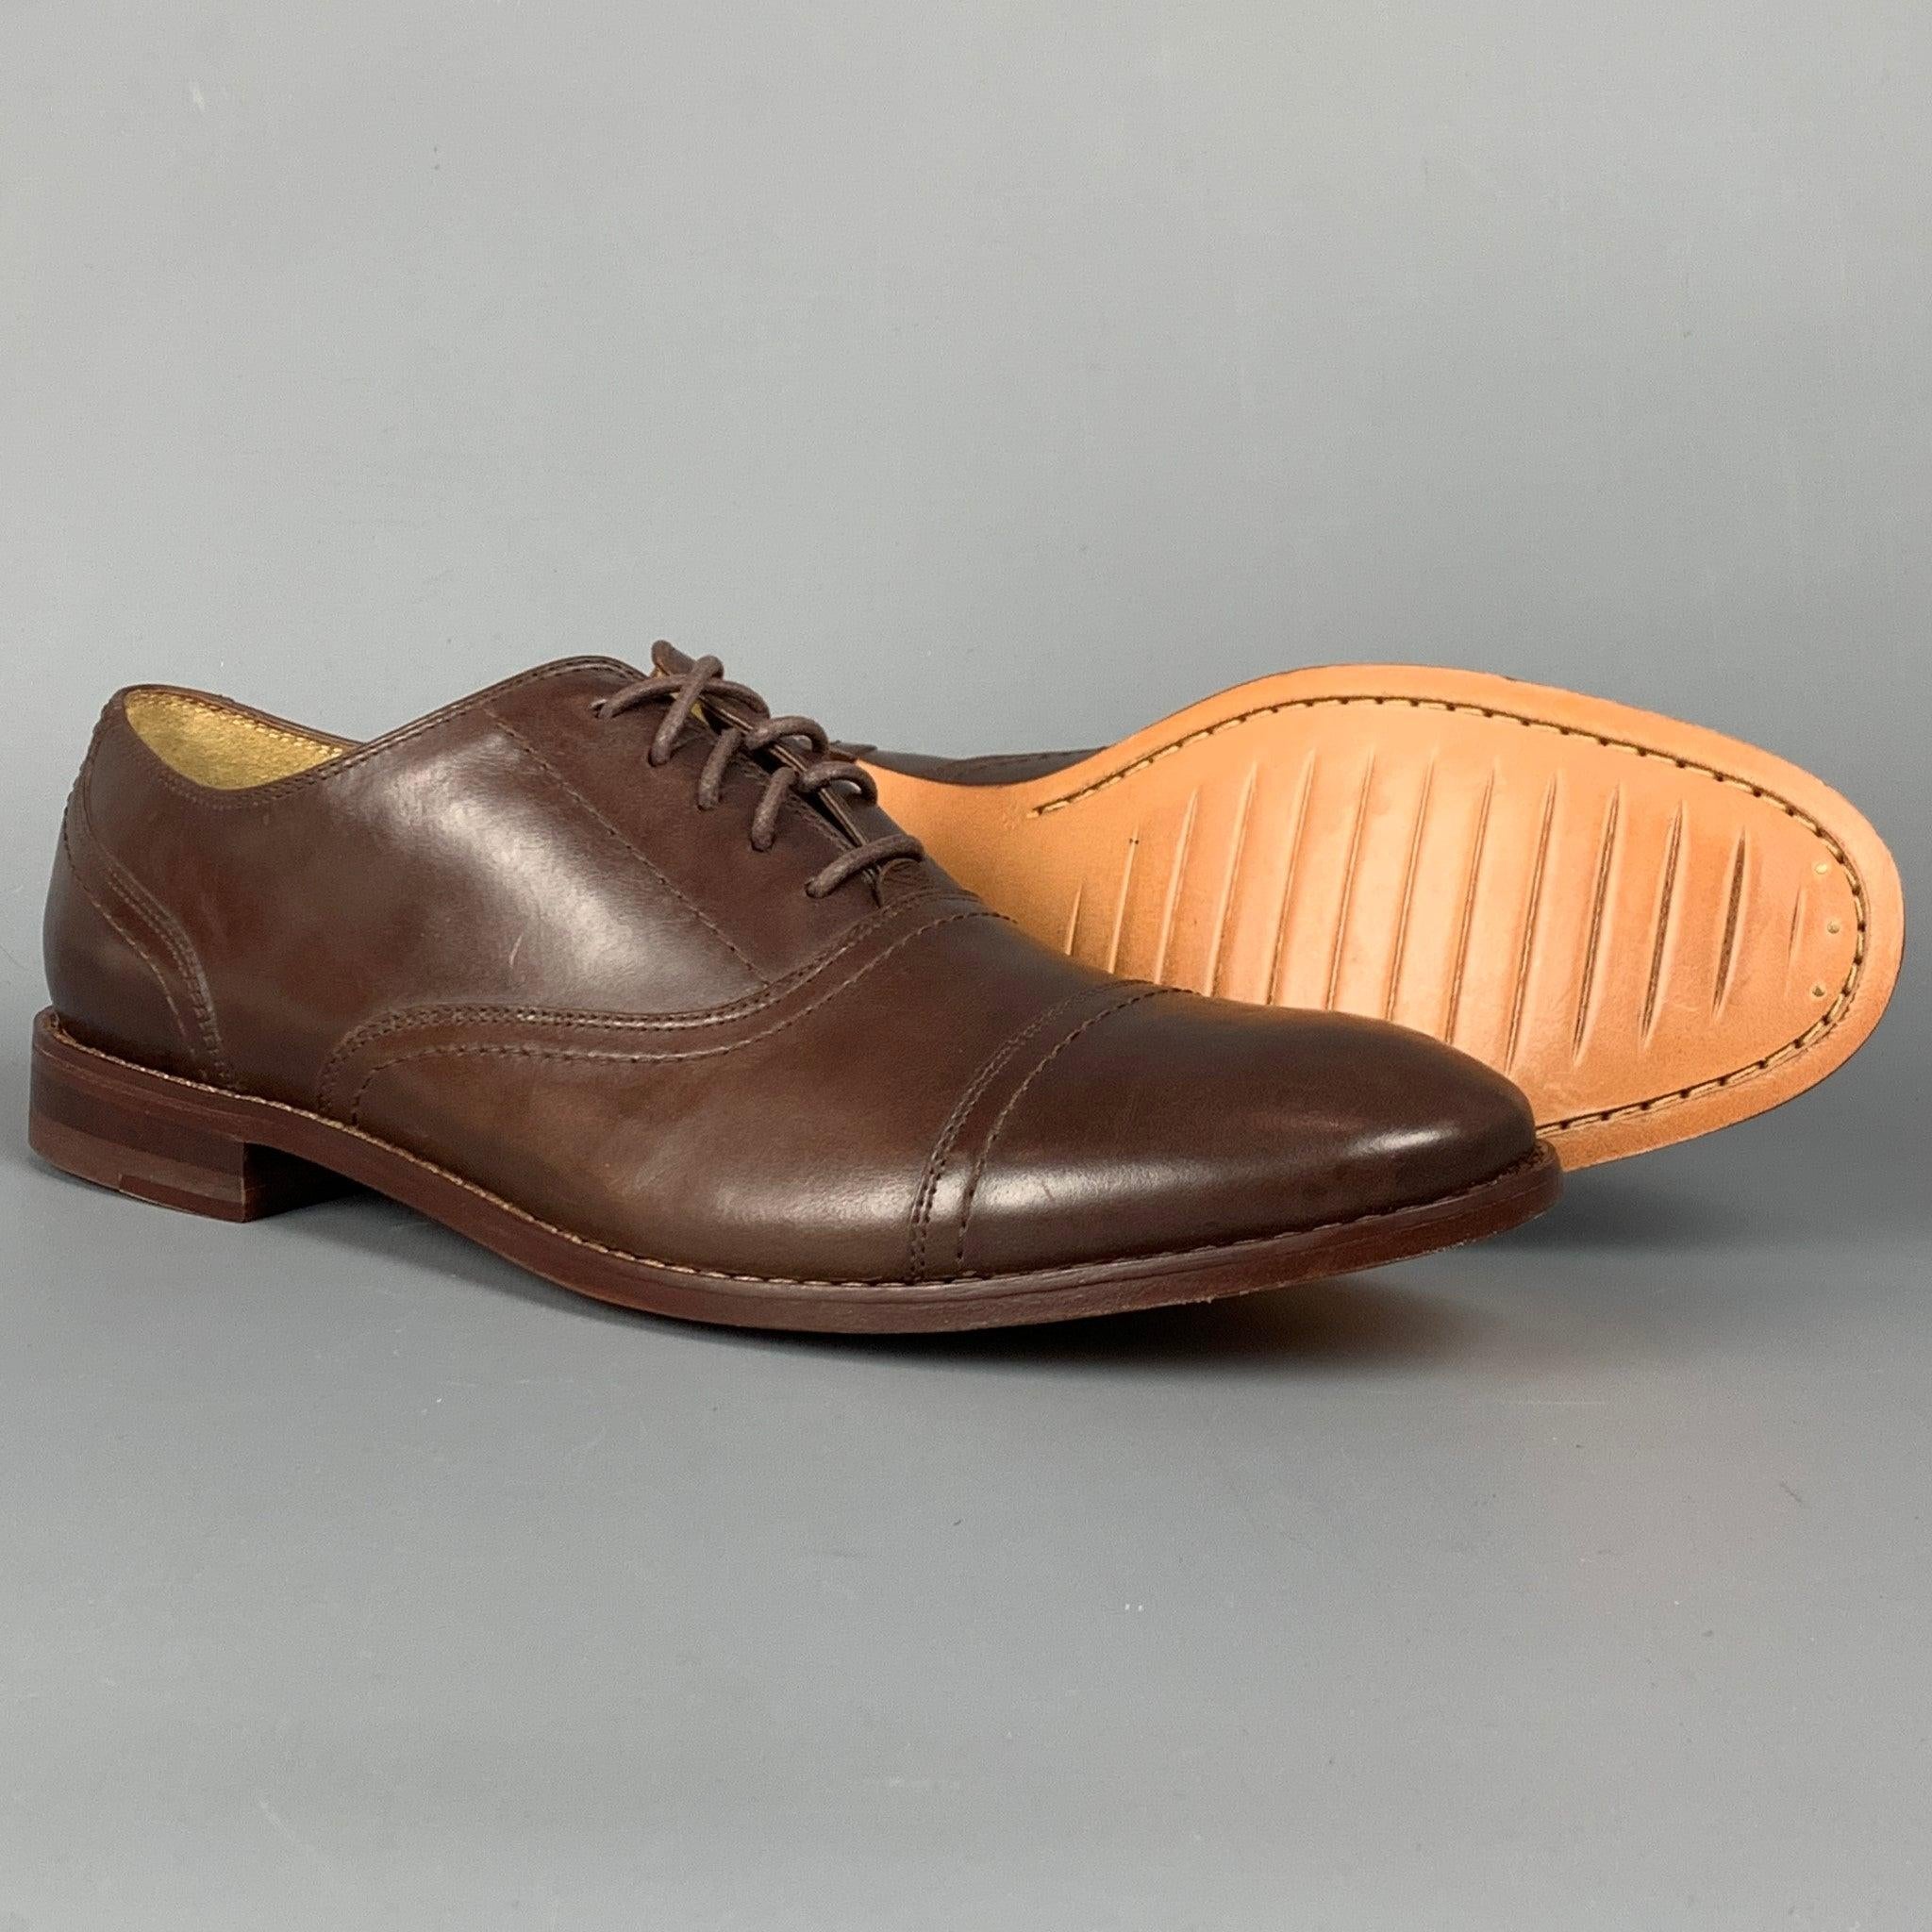 MICHAEL BASTIAN Size 10 Brown Leather Cap Toe Lace Up Shoes In Good Condition For Sale In San Francisco, CA